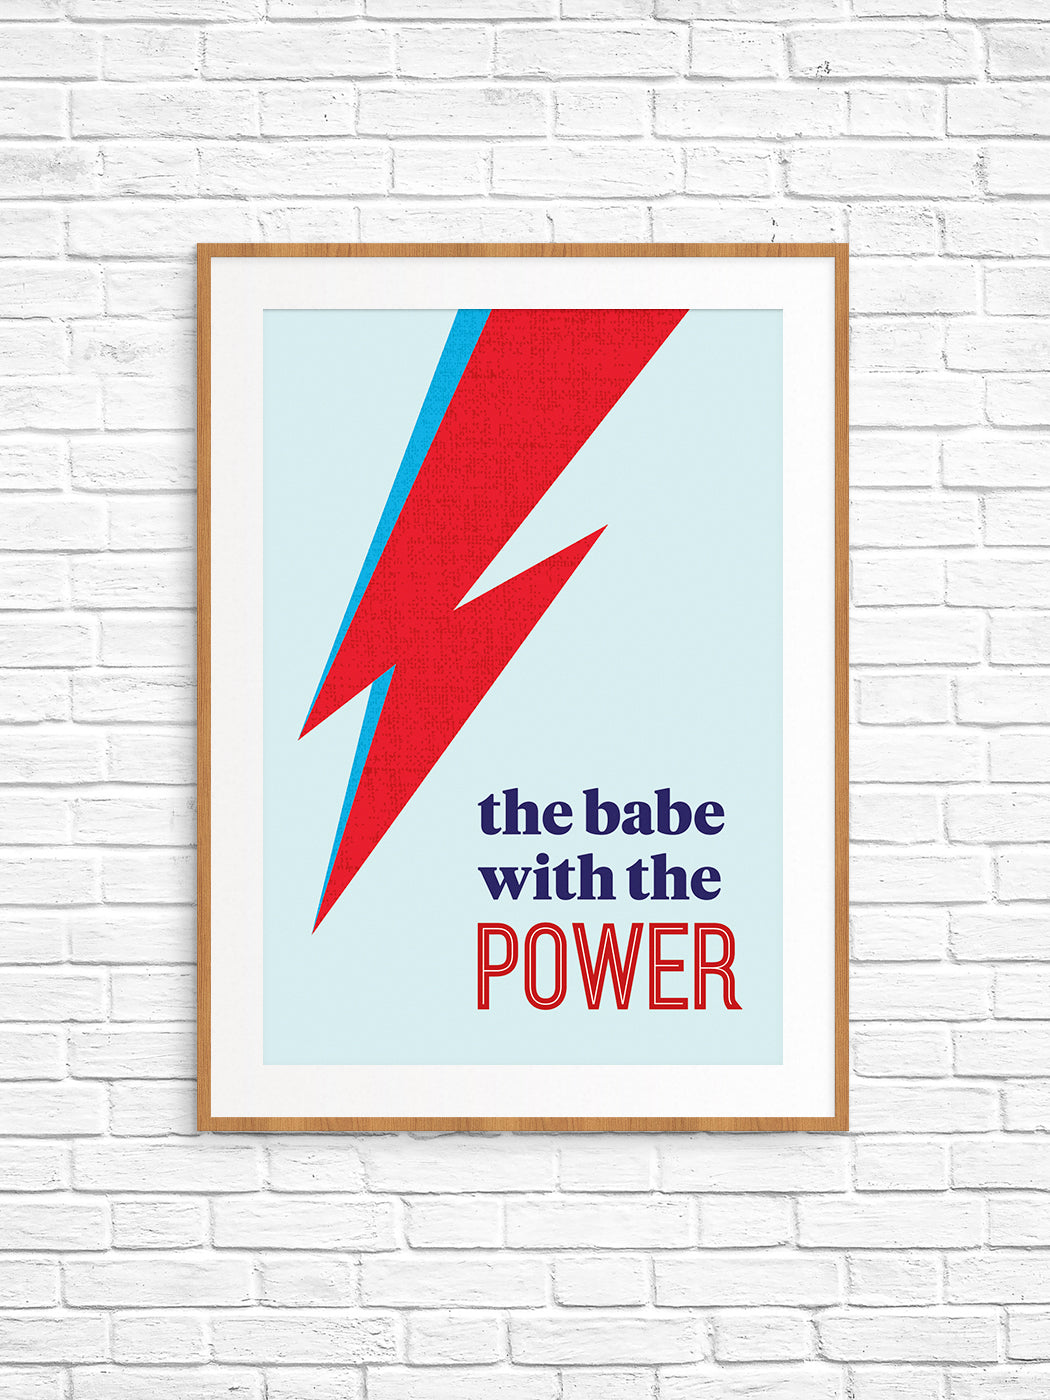 The babe with the power printable wall art